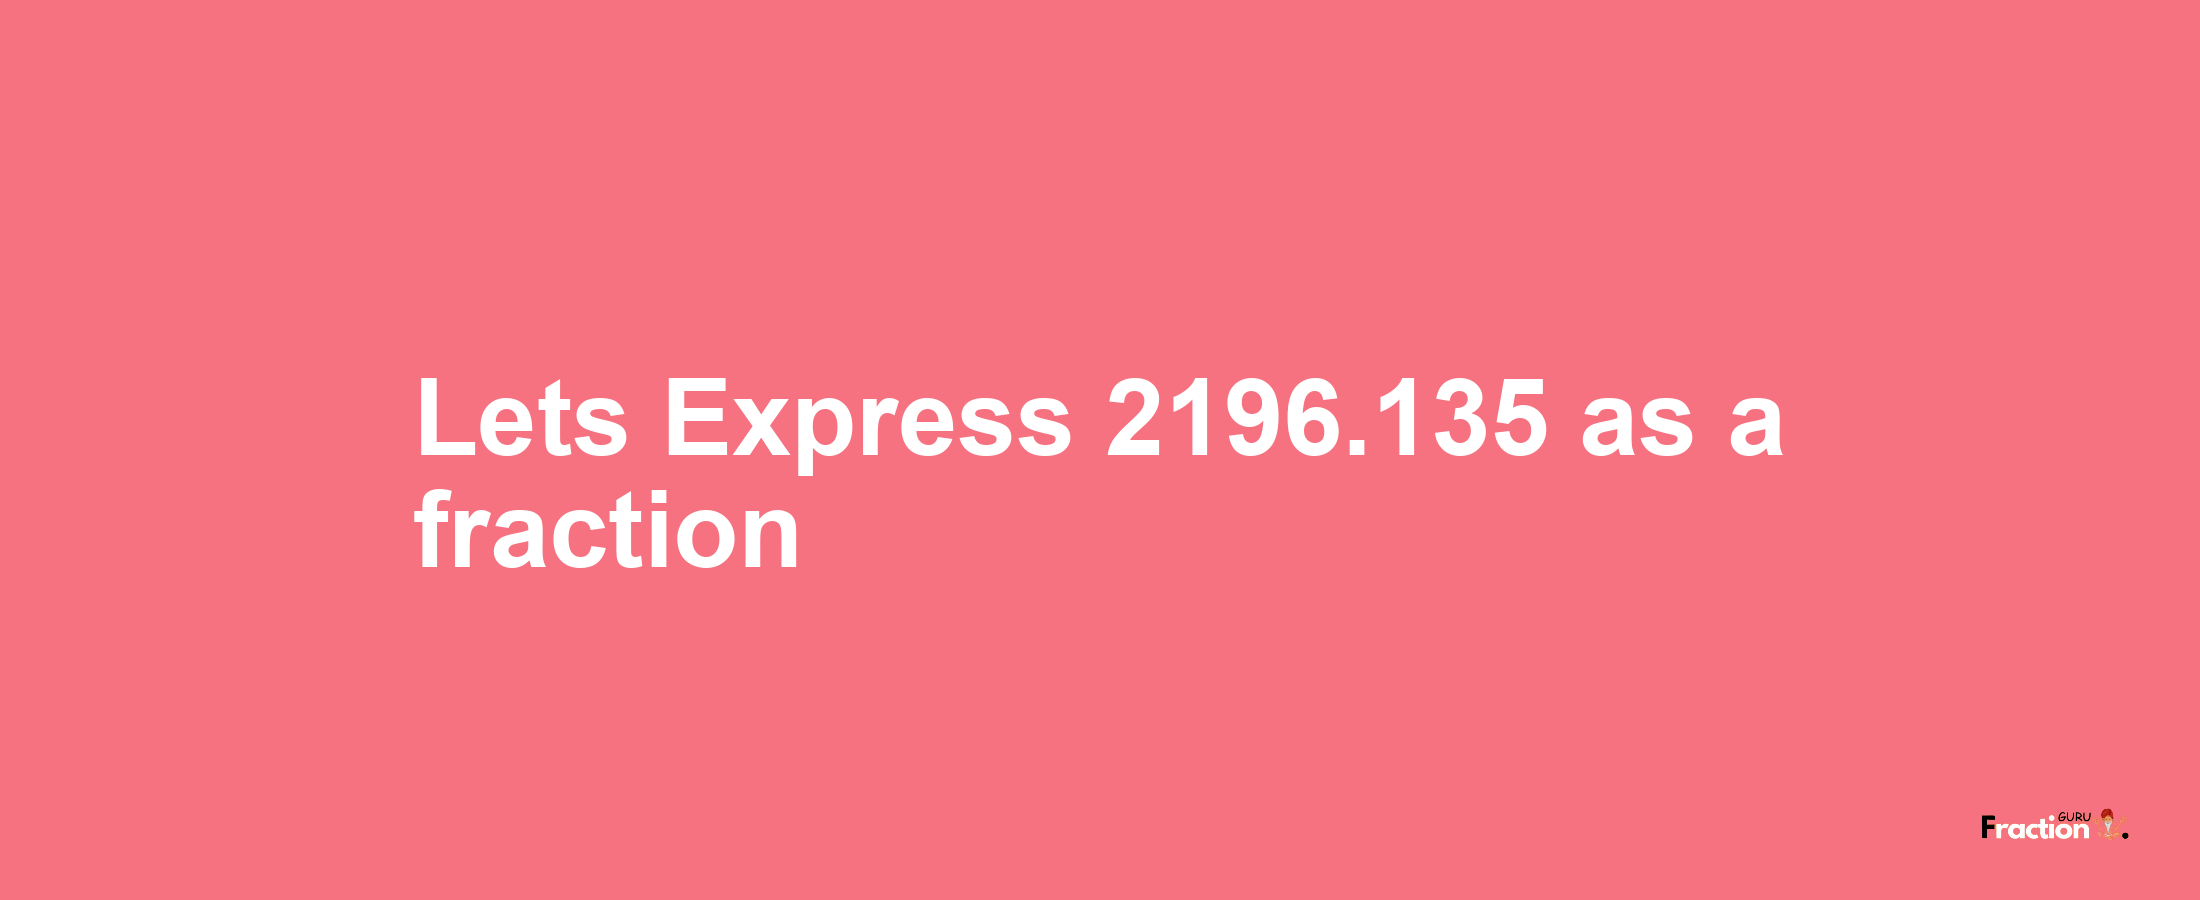 Lets Express 2196.135 as afraction